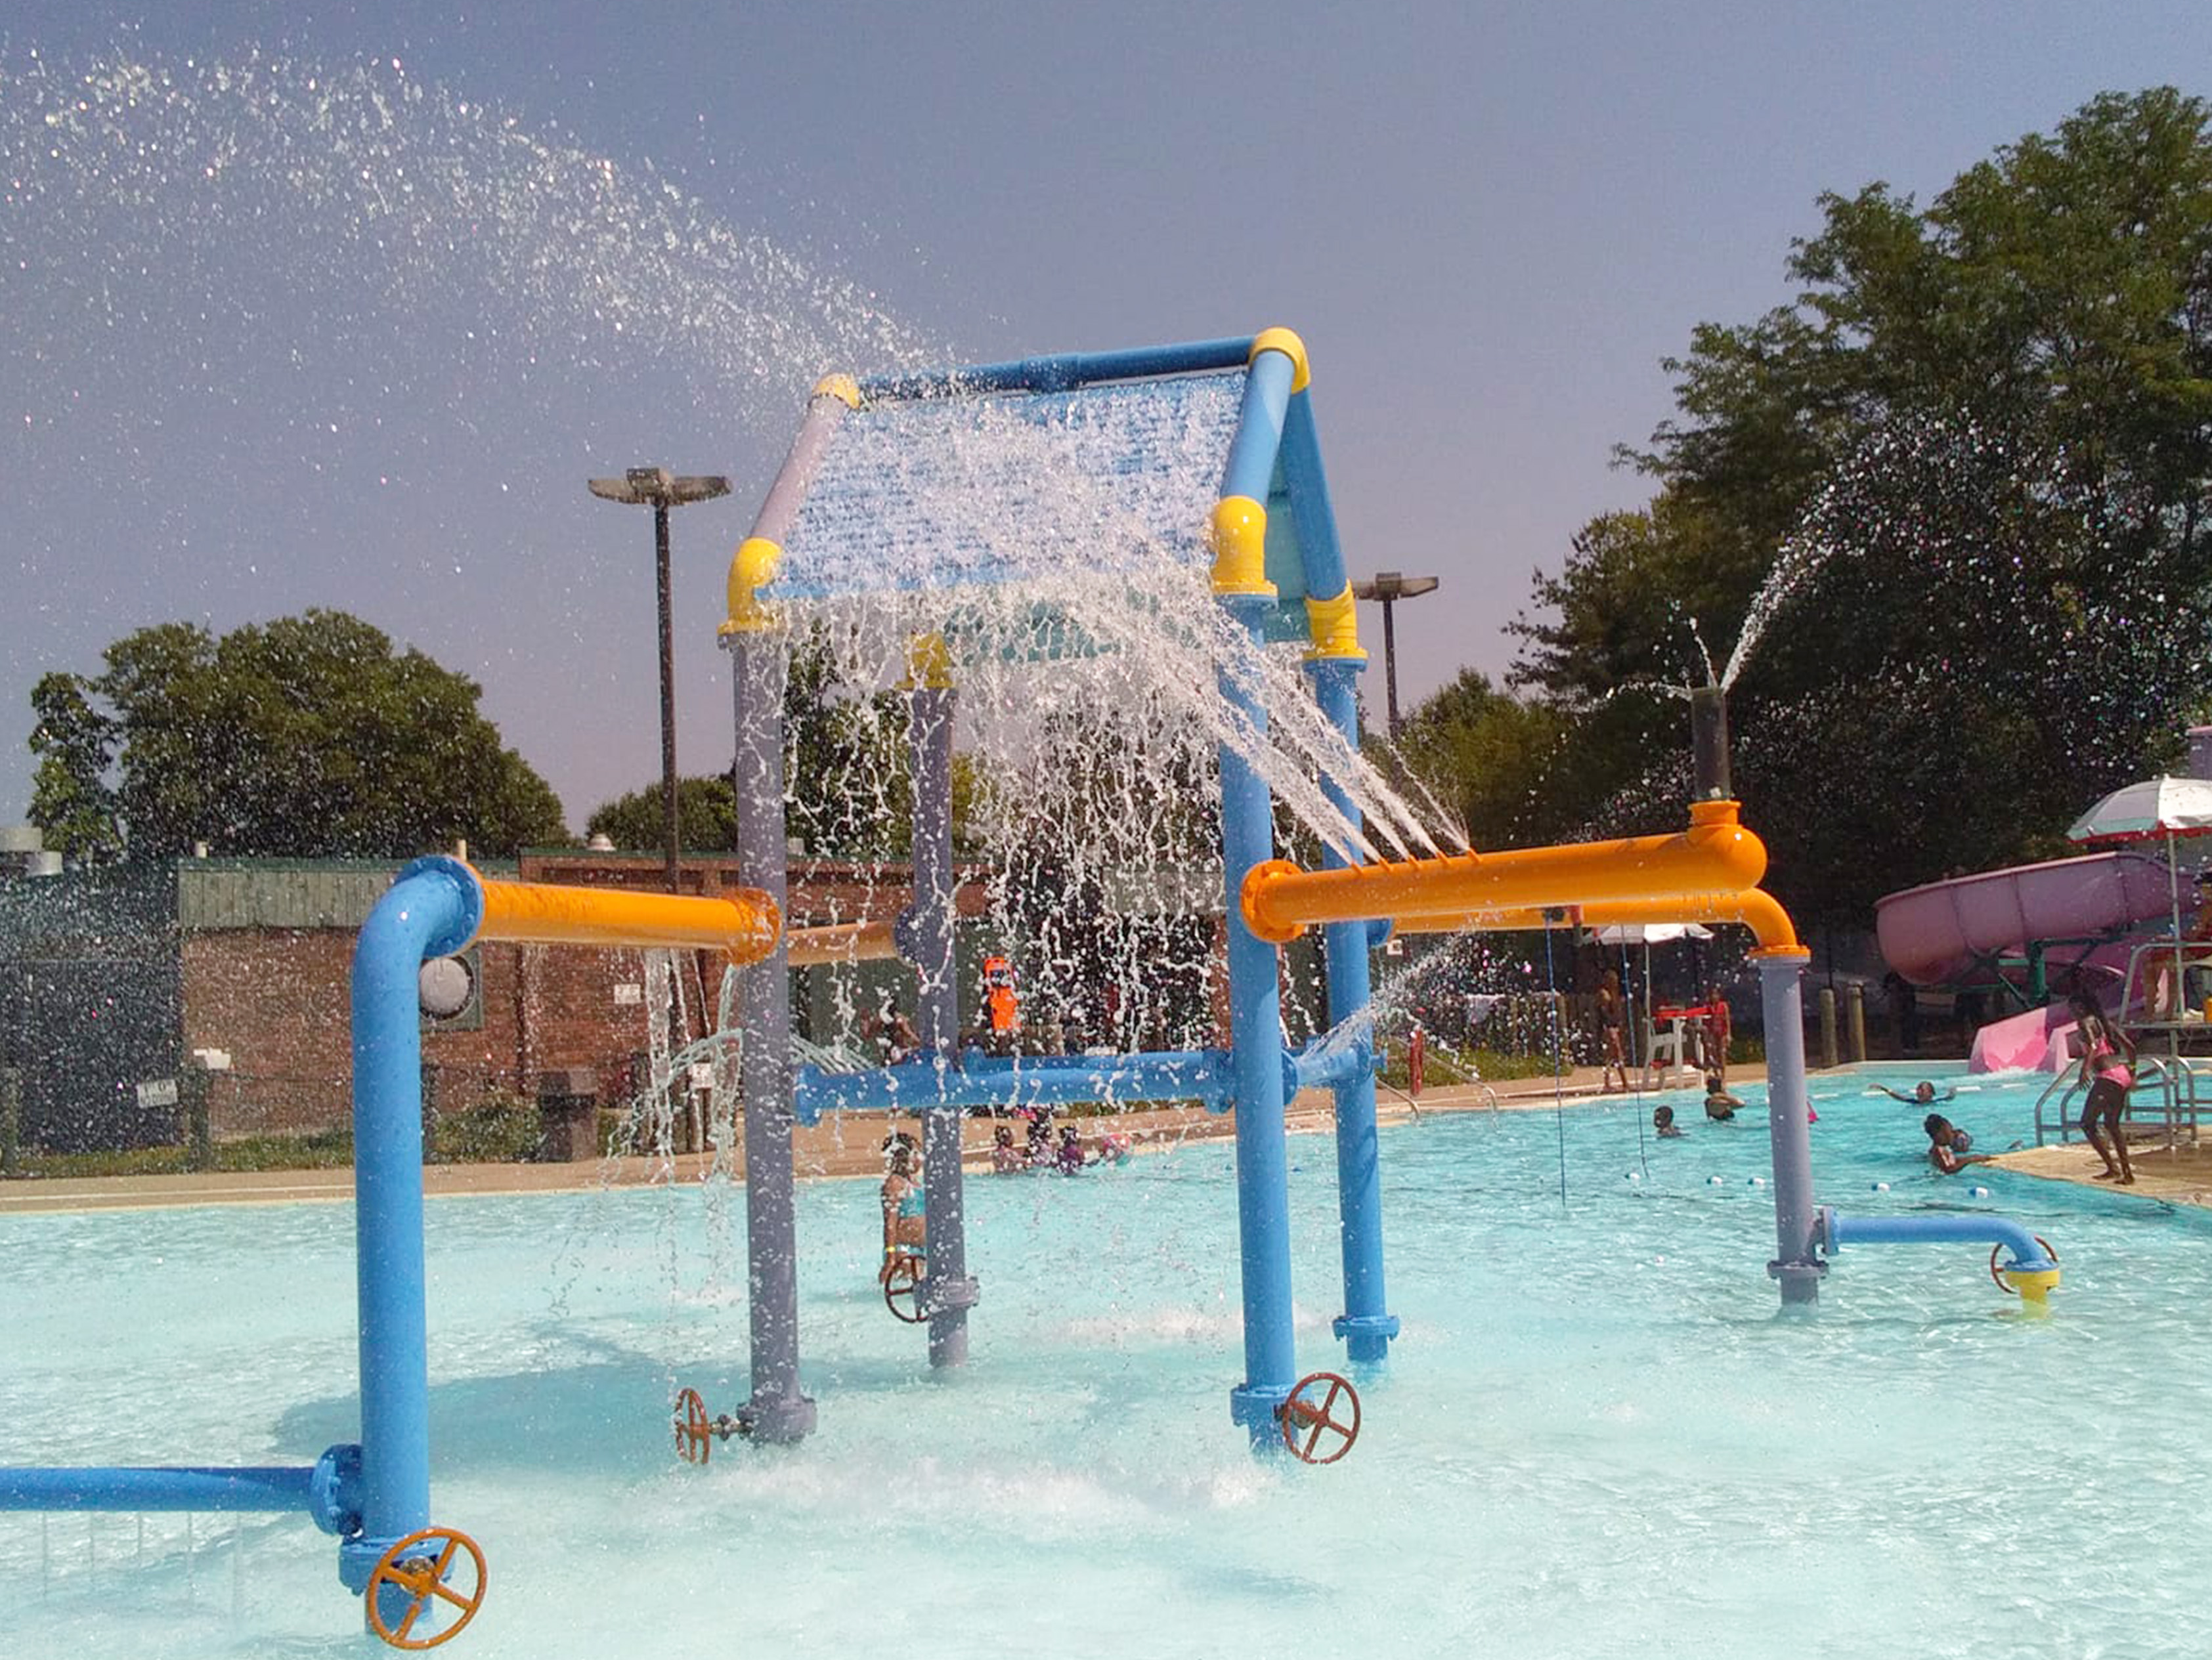 Explore our pools and splash pads!